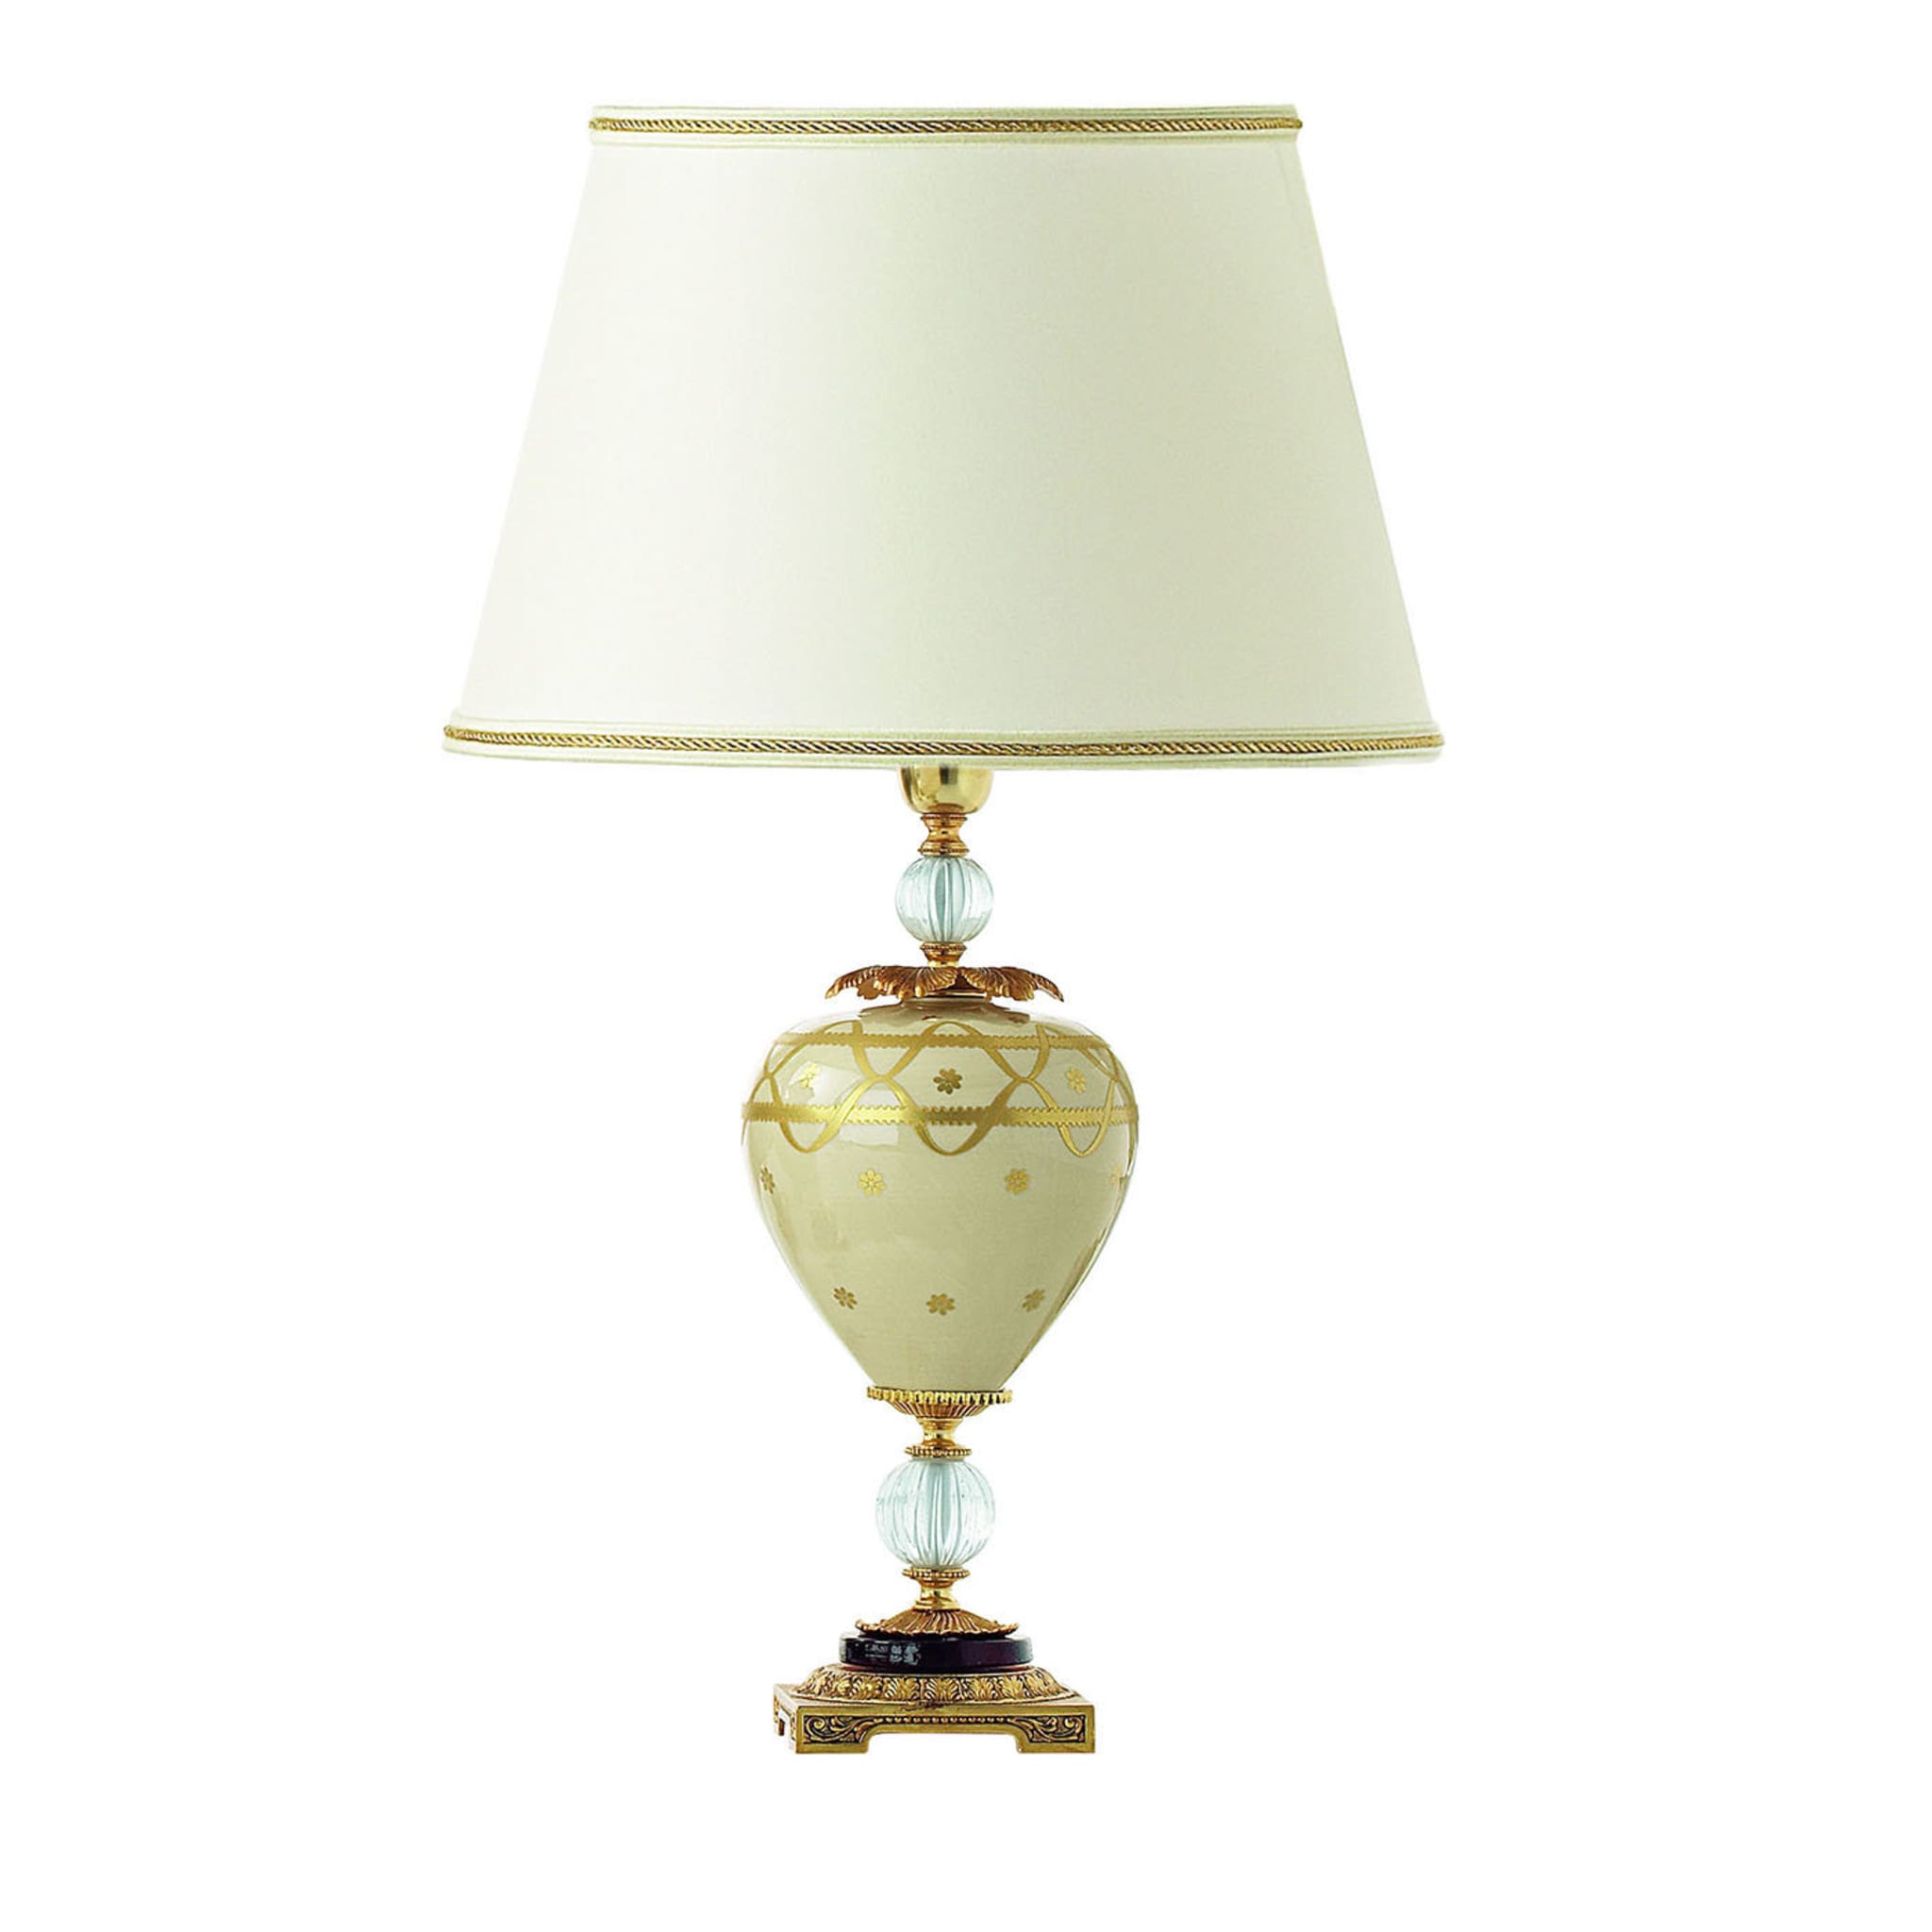 Elite Gold Table Lamp #1 - Main view